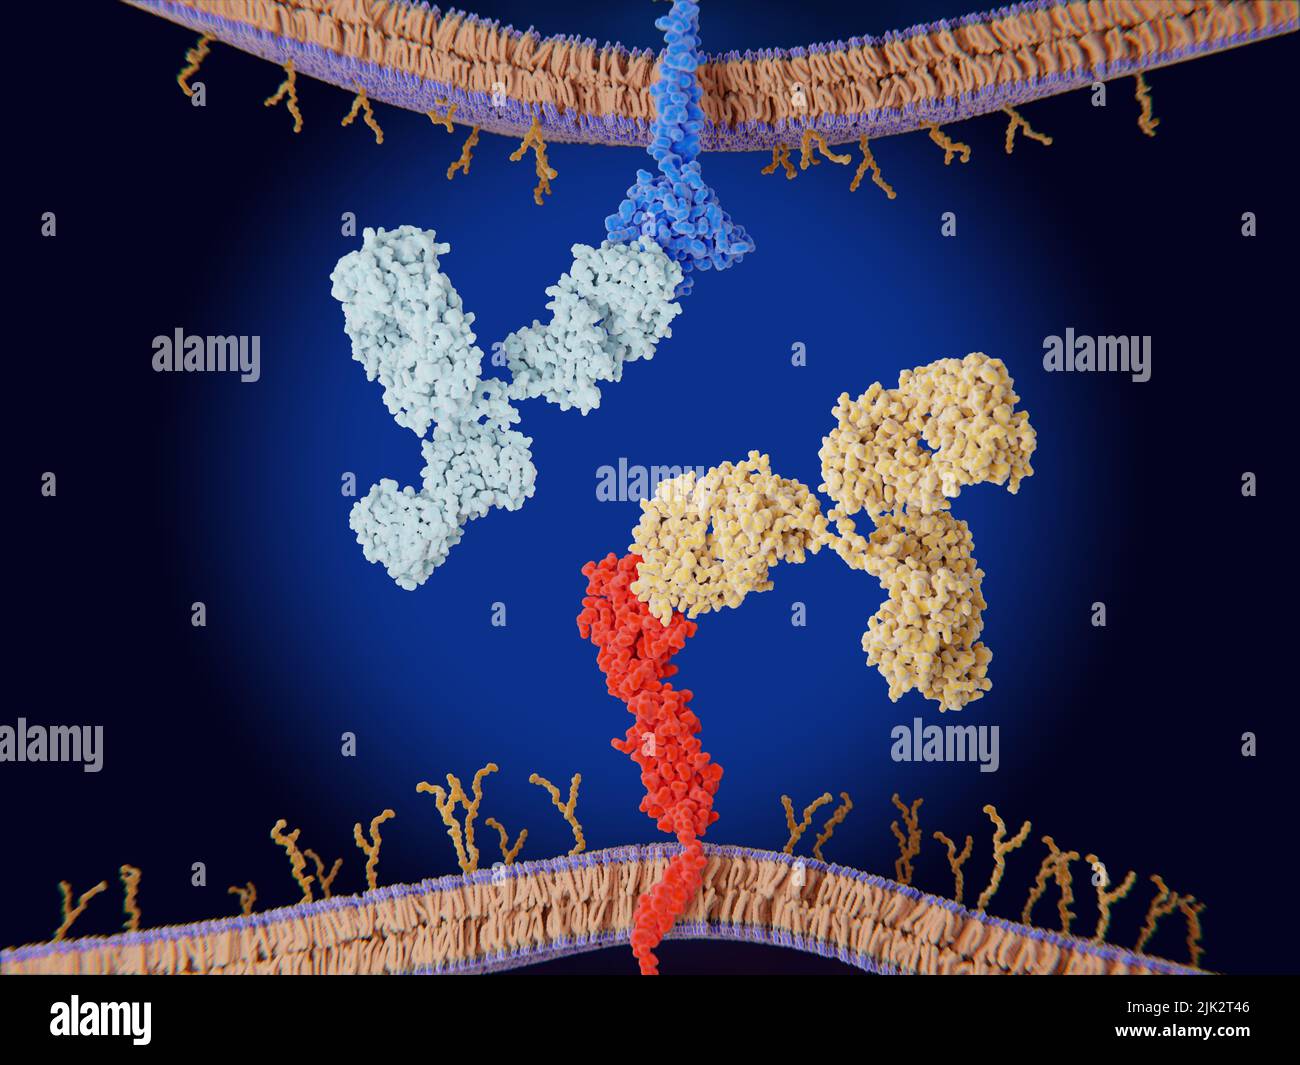 Immune checkpoint inhibitors, illustration. Immune checkpoints are regulators of the immune system. The illustration shows antibodies blocking the interaction between PD-L1 (red) on the surface of a cancer cell and the immune checkpoint PD-1 (blue) on a T-cell, allowing T-cells to attack the cancer cells. Stock Photo